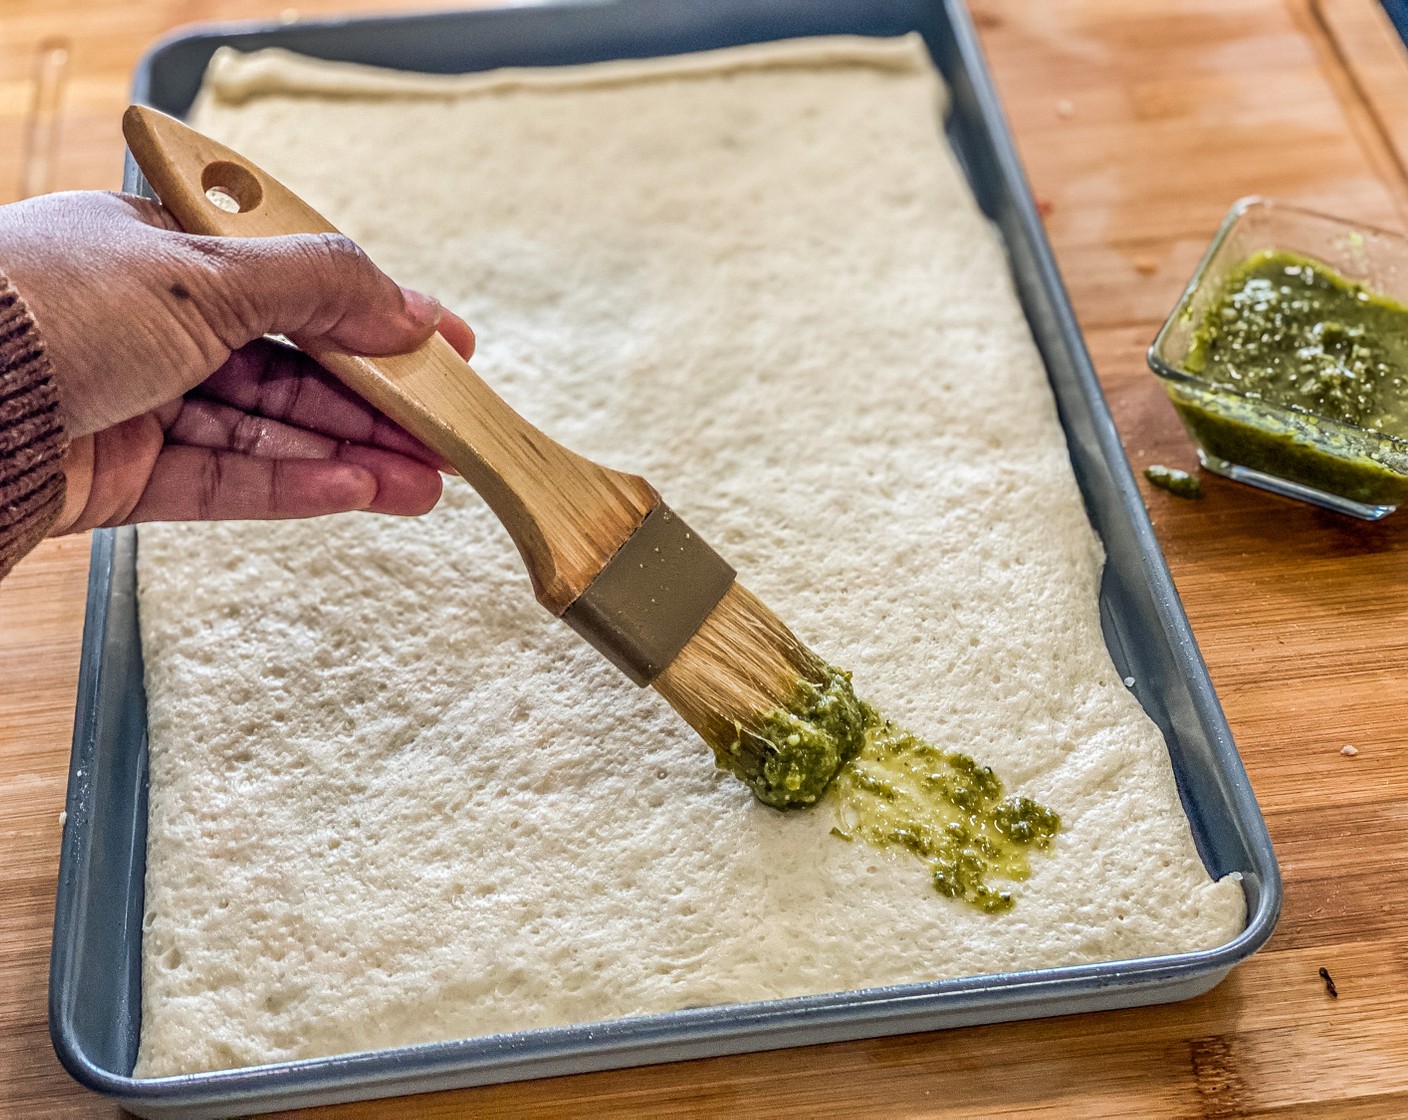 step 3 Brush 1 tablespoon of pesto sauce evenly over all the pizza dough.